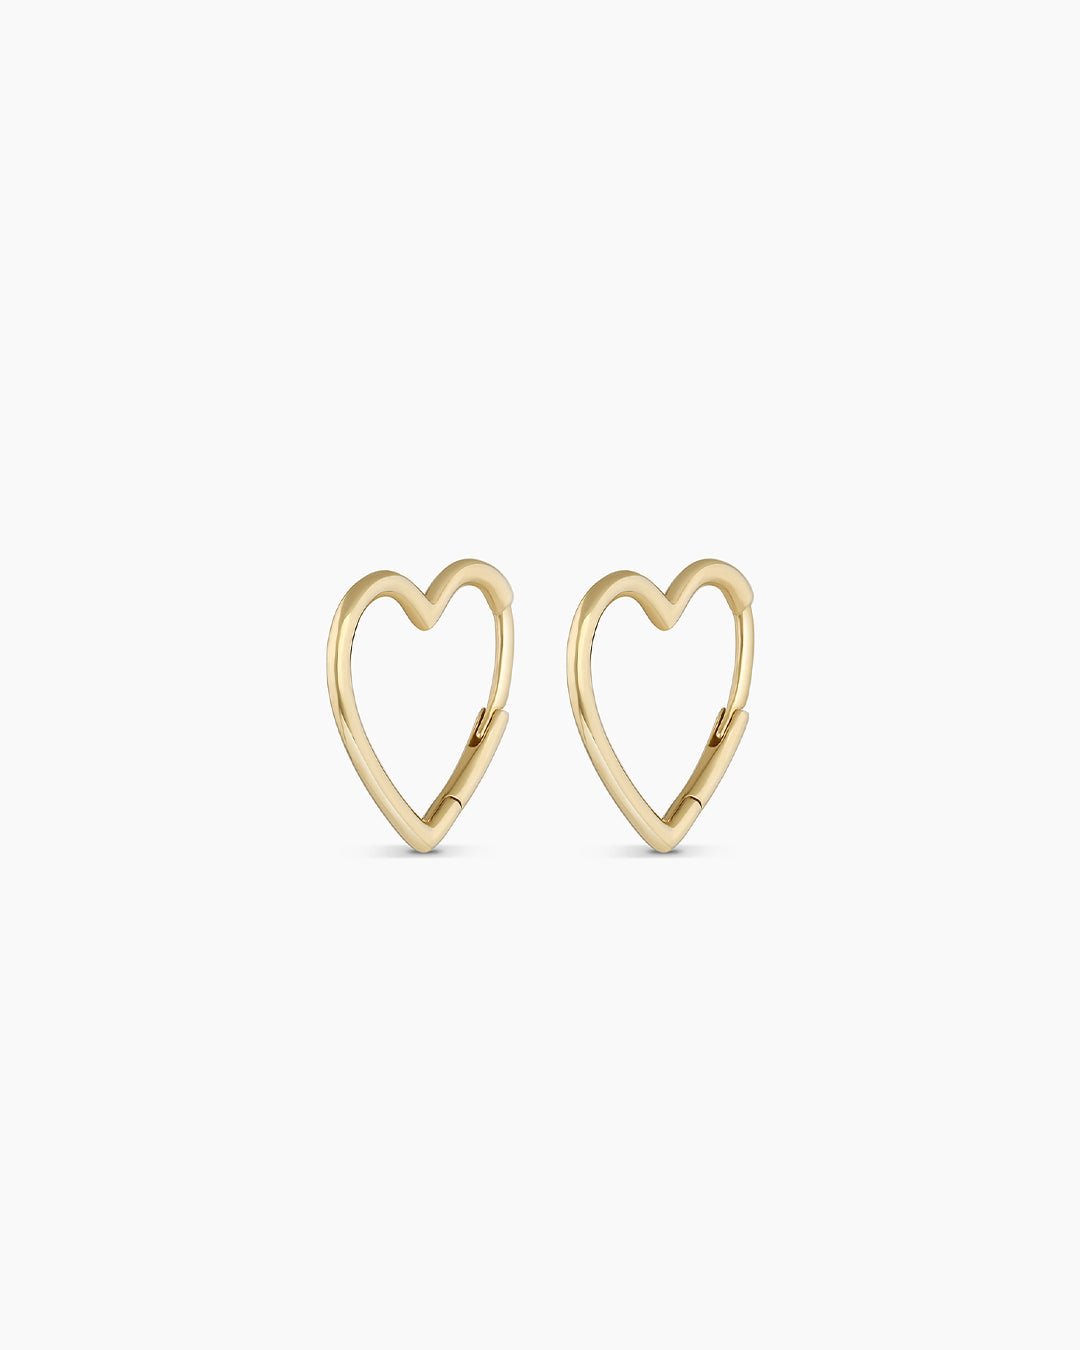 Tiny Heart Stud Earrings in Solid Gold 14K White